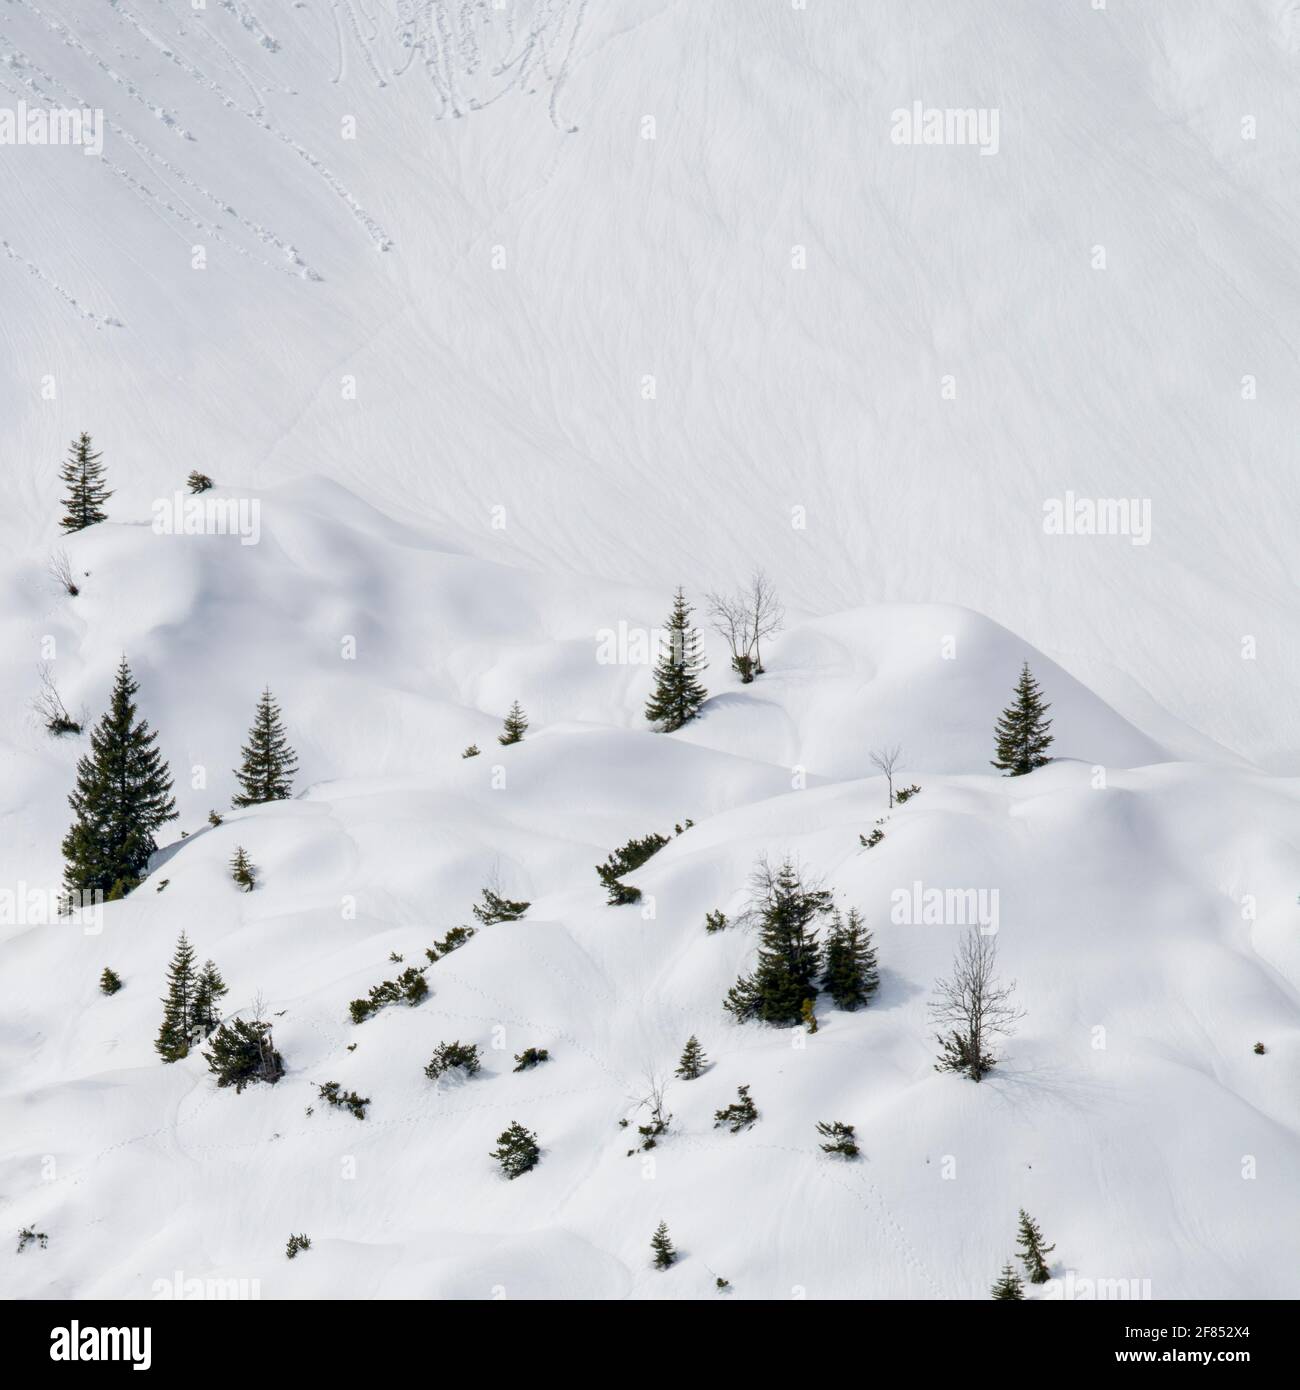 Winter patterns in snow on mountain with trees Stock Photo